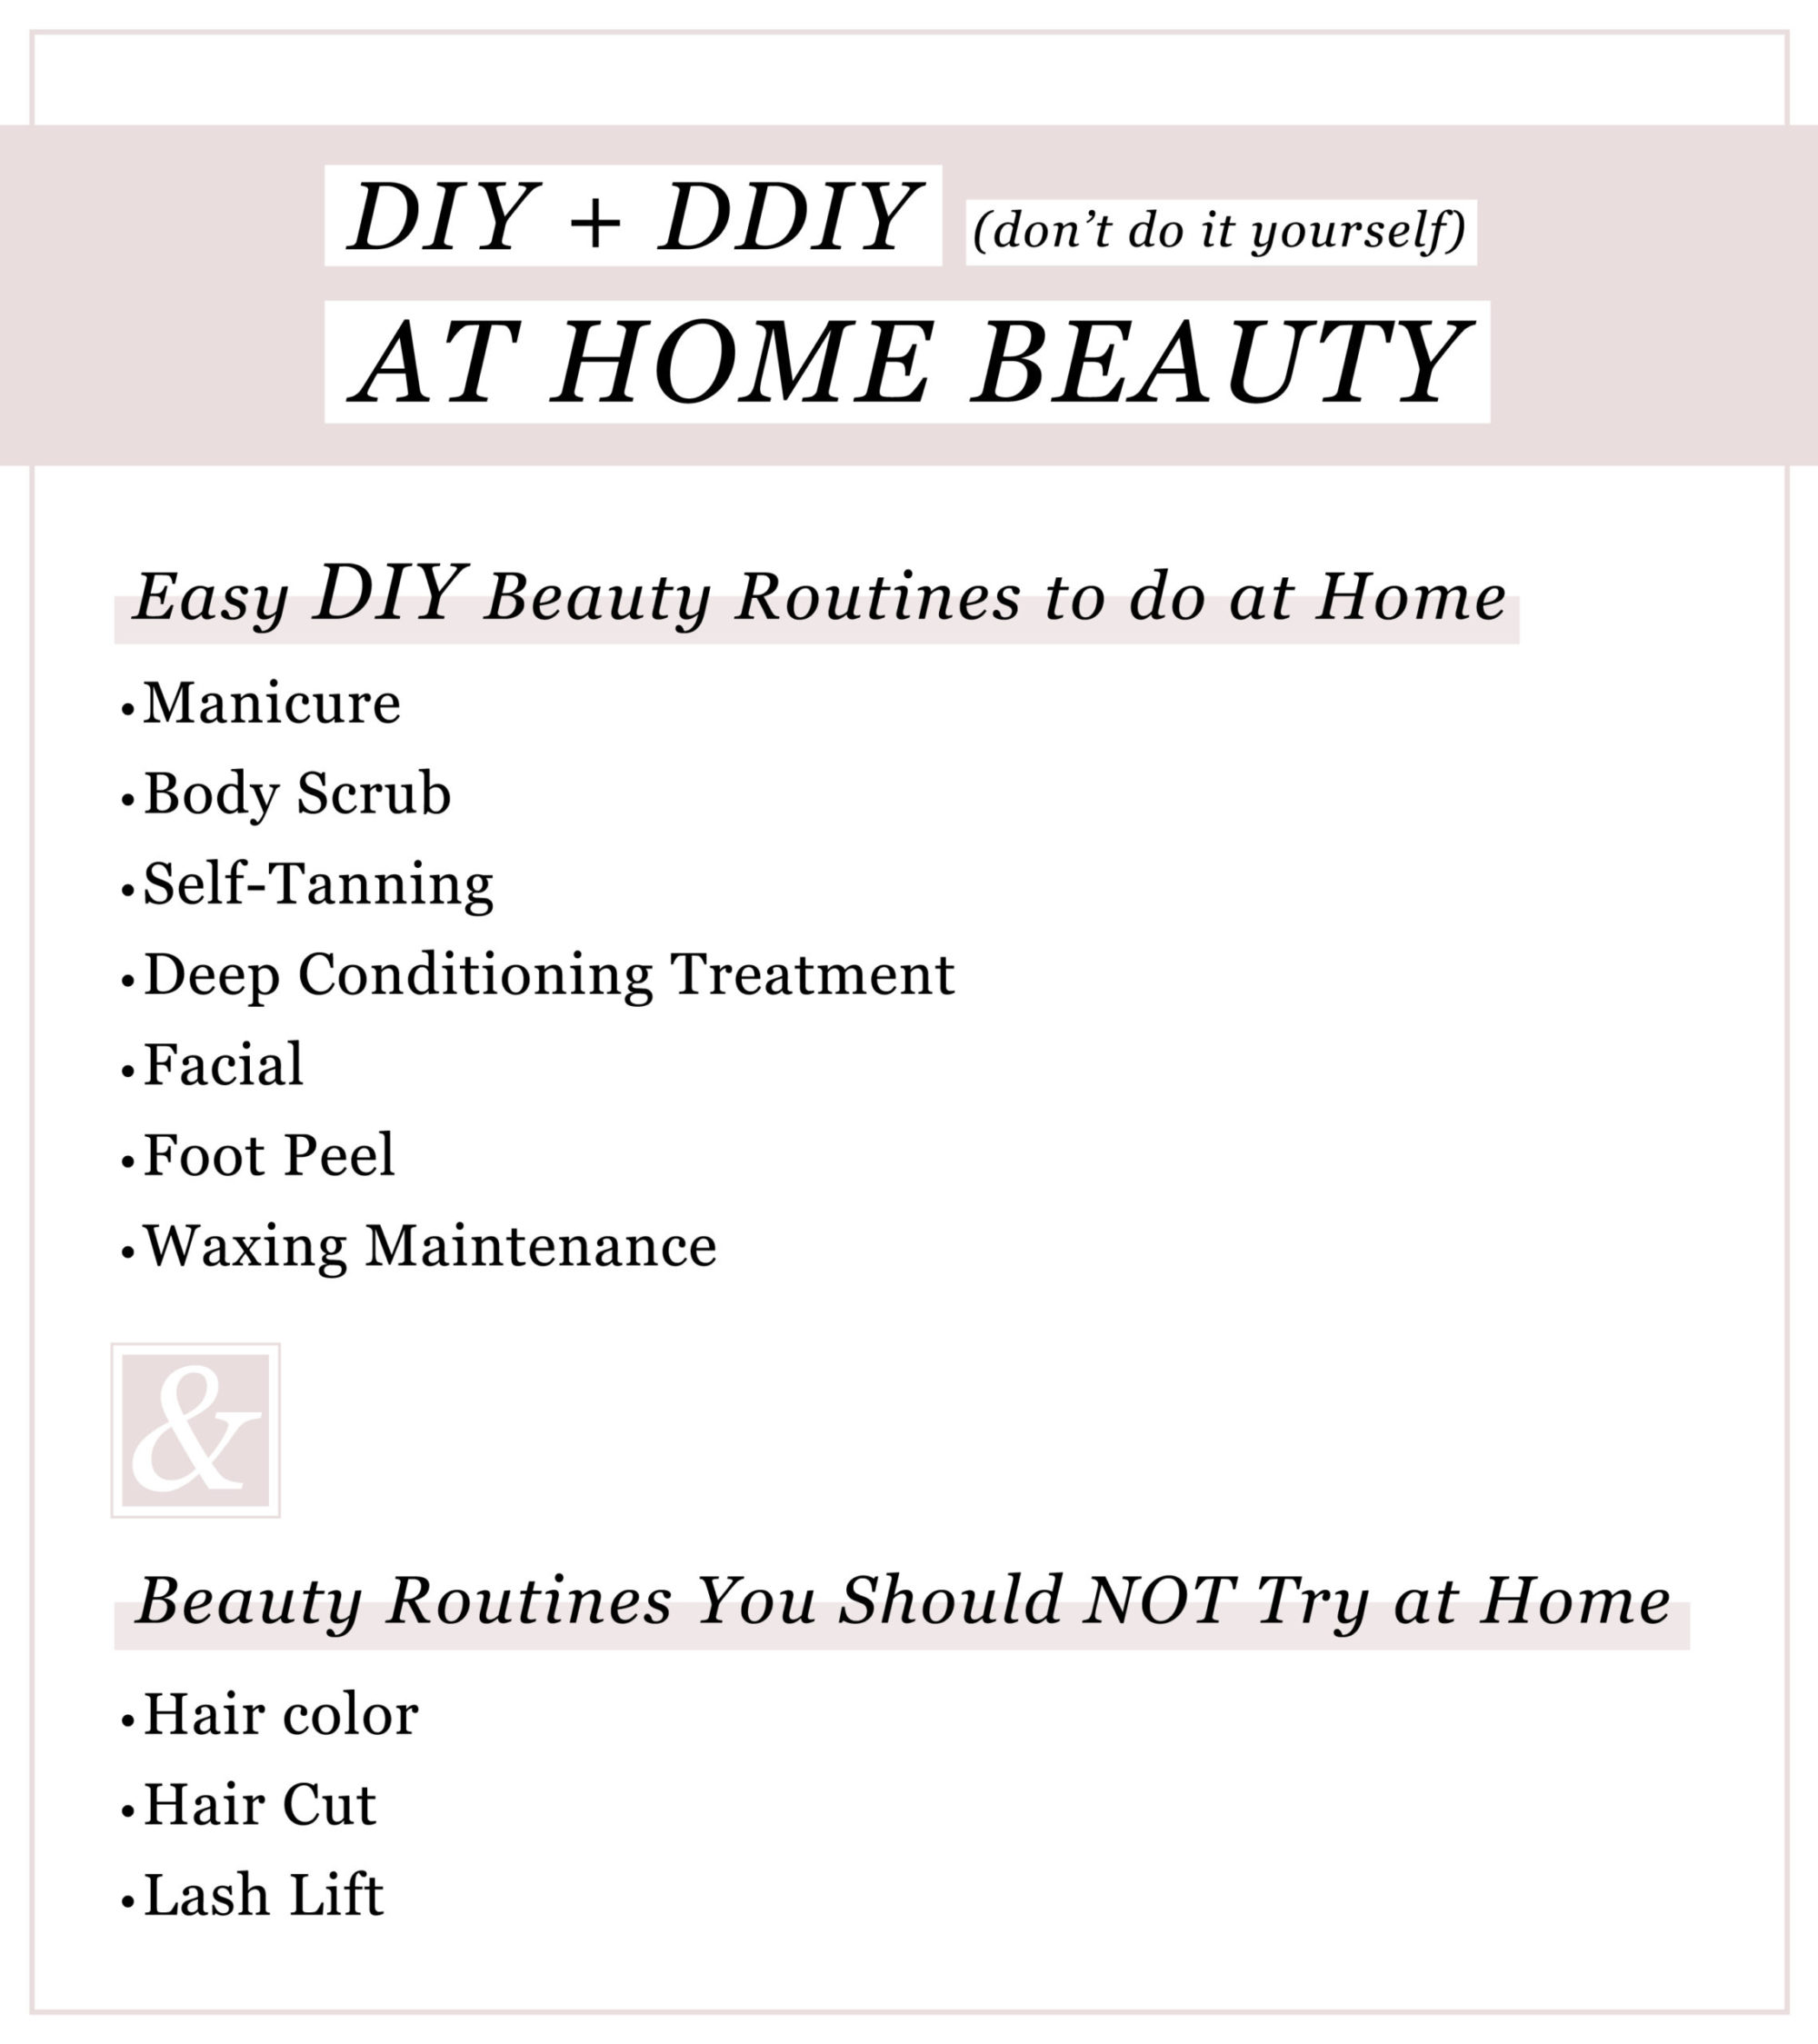 What Beauty Routines Can you DIY, and Which Ones You Shouldn’t!